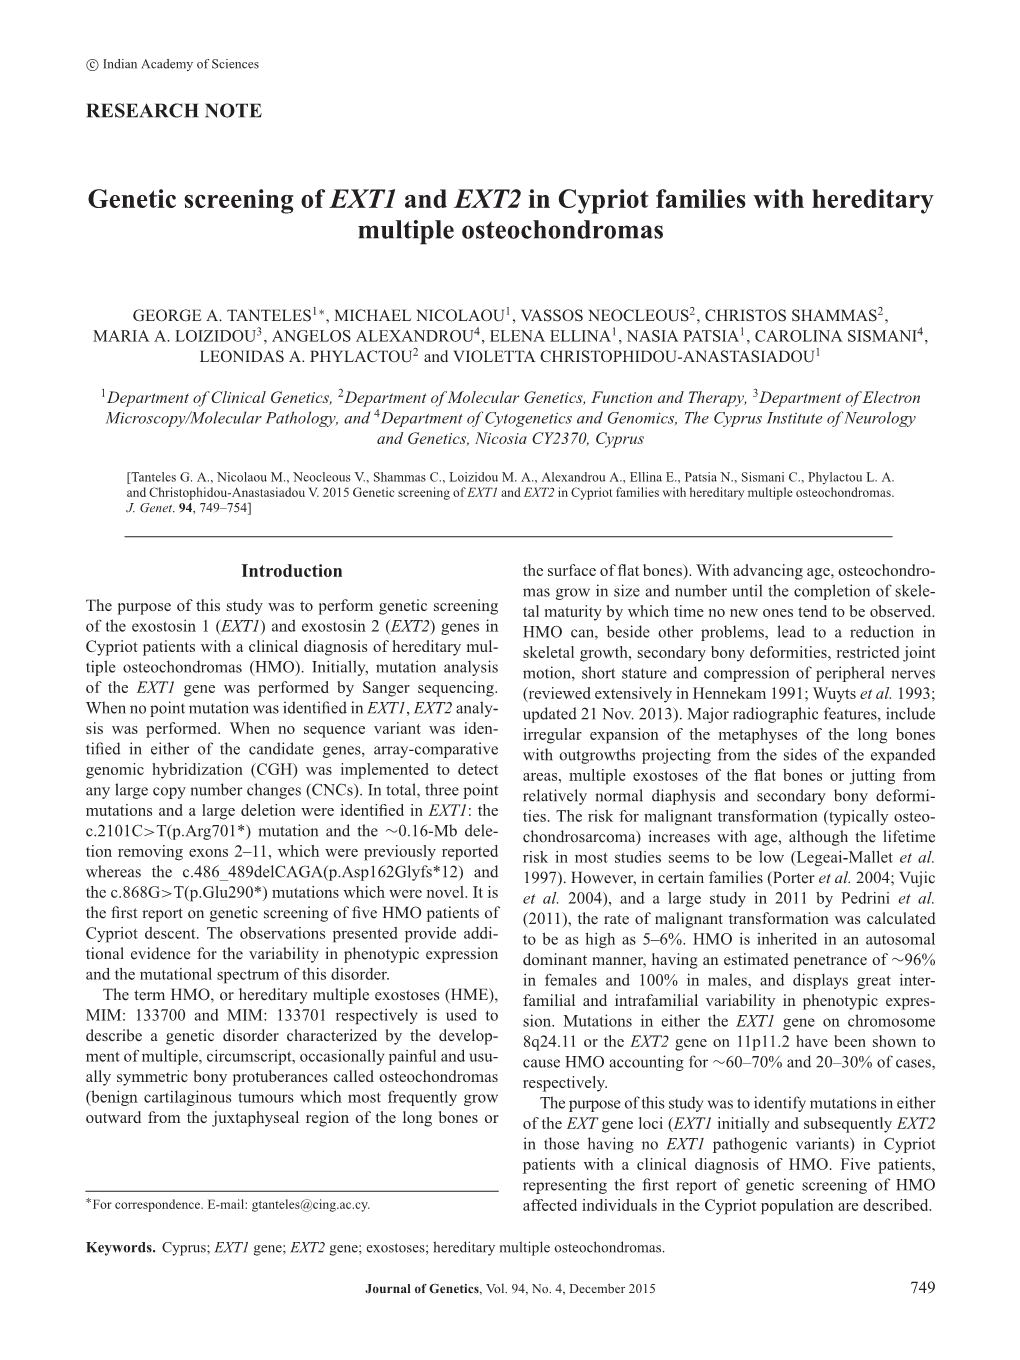 Genetic Screening of EXT1 and EXT2 in Cypriot Families with Hereditary Multiple Osteochondromas